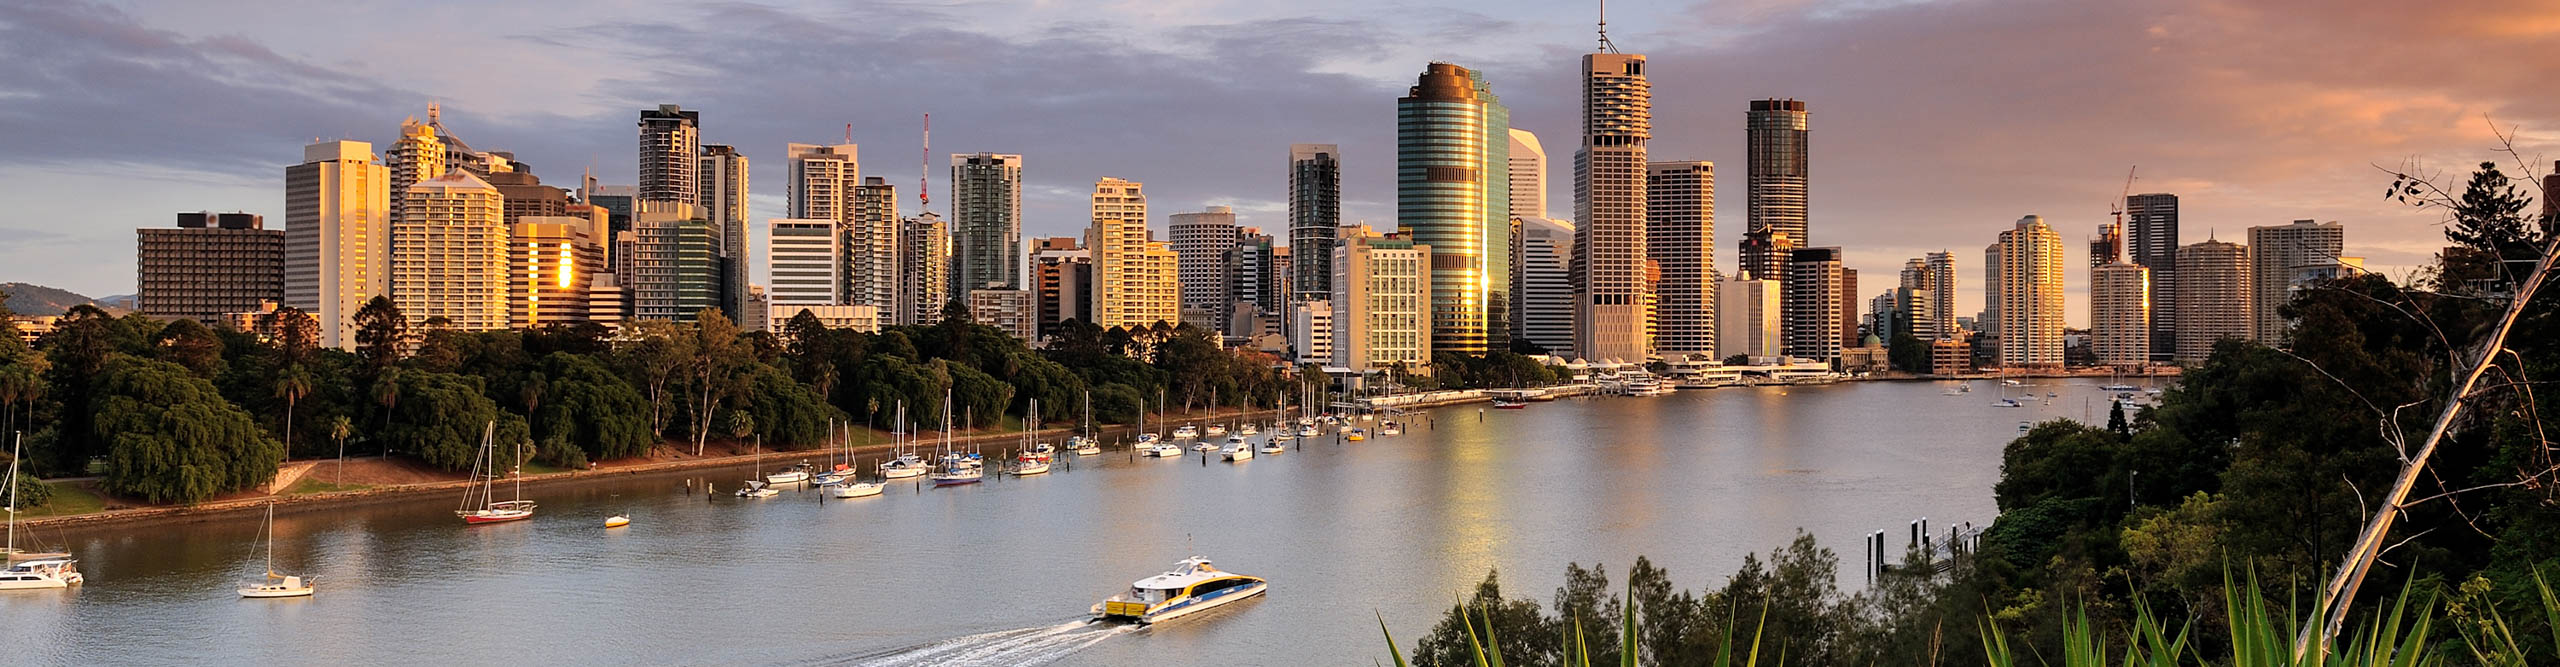 Brisbane river at sunset with boats sailing through and the buildings glowing orange